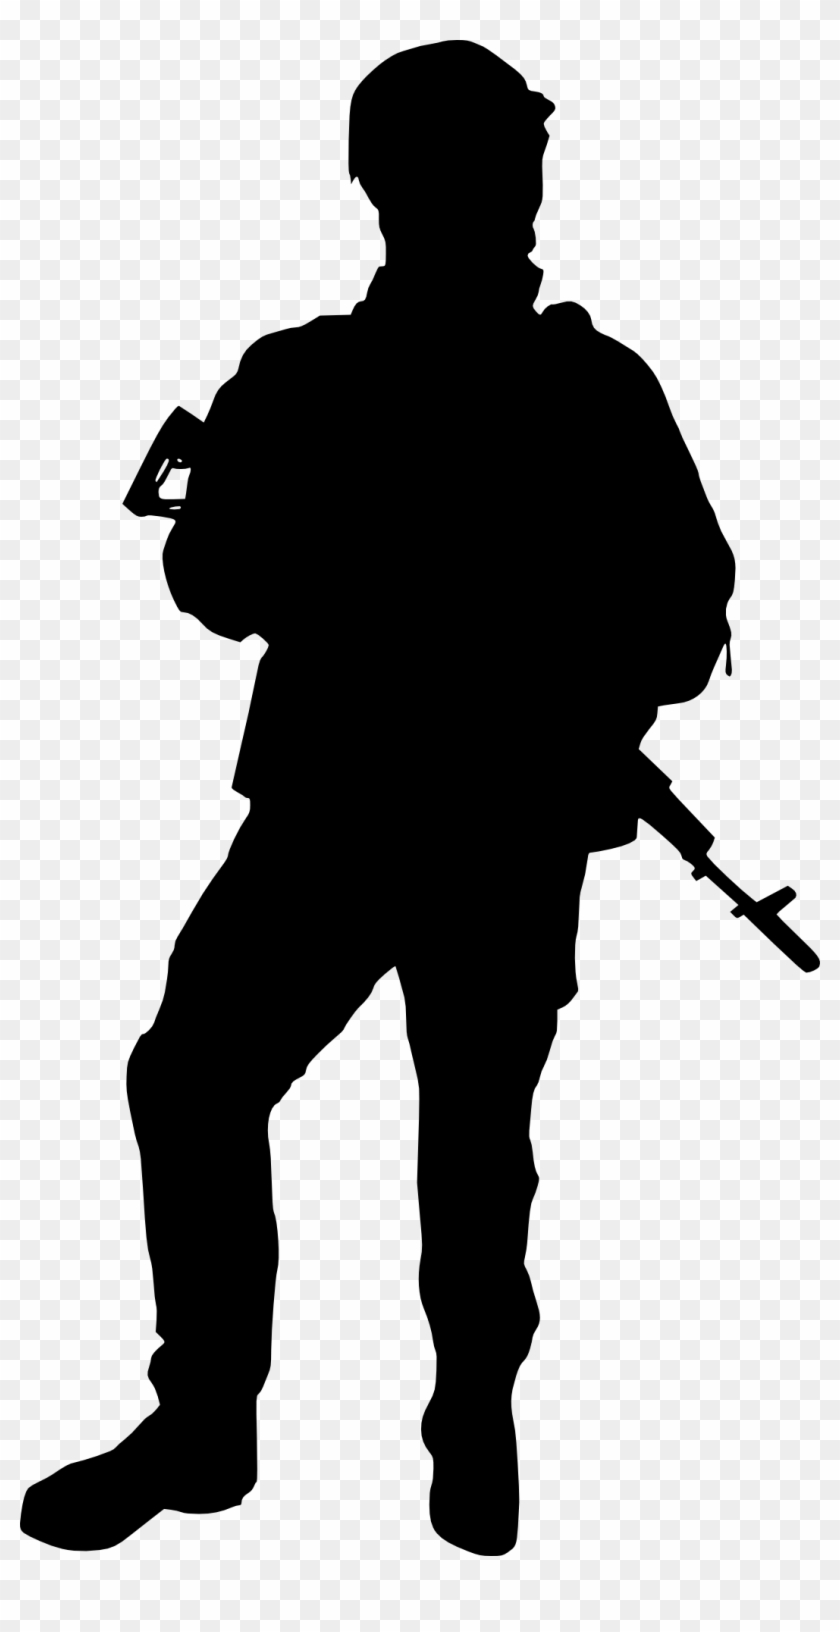 Free Download - Soldier Silhouette No Background Clipart #259092